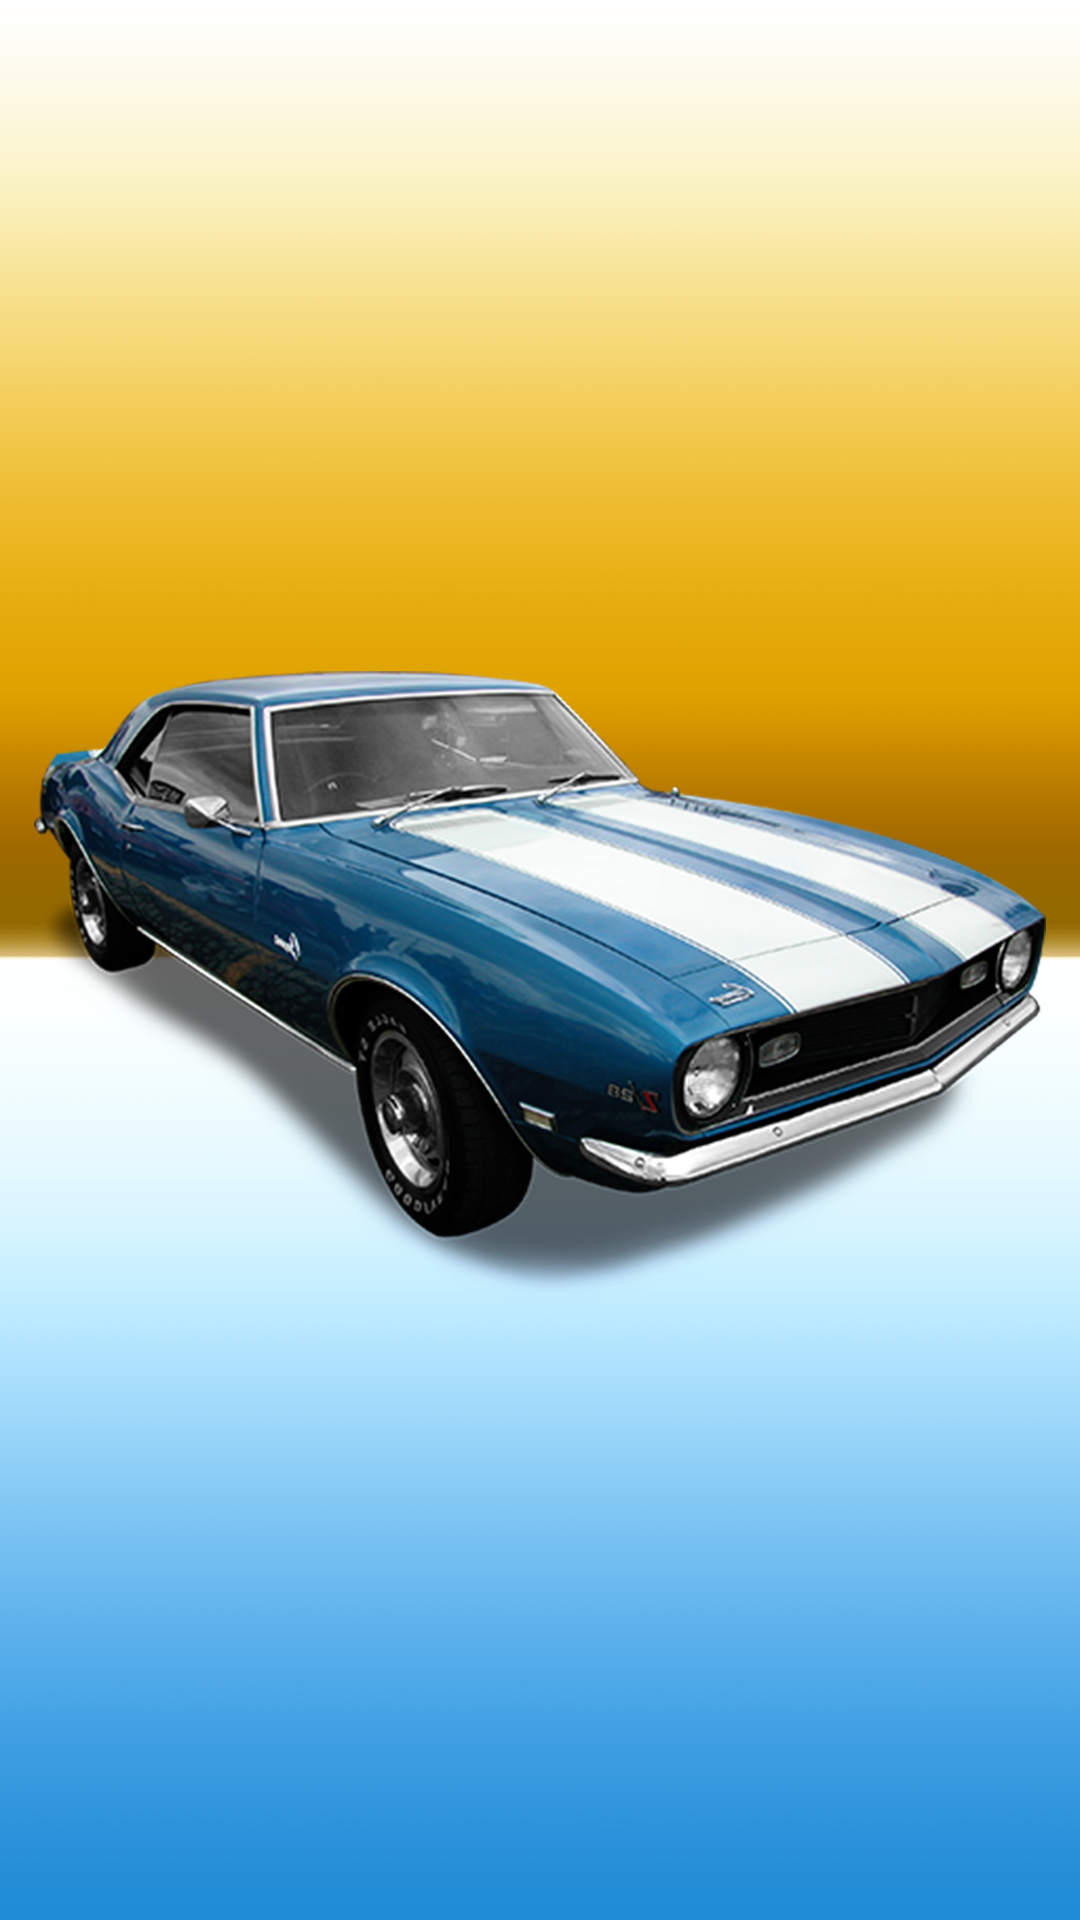 Muscle Car Wallpaper For Android HD .mommawithamegaphone.blogspot.com